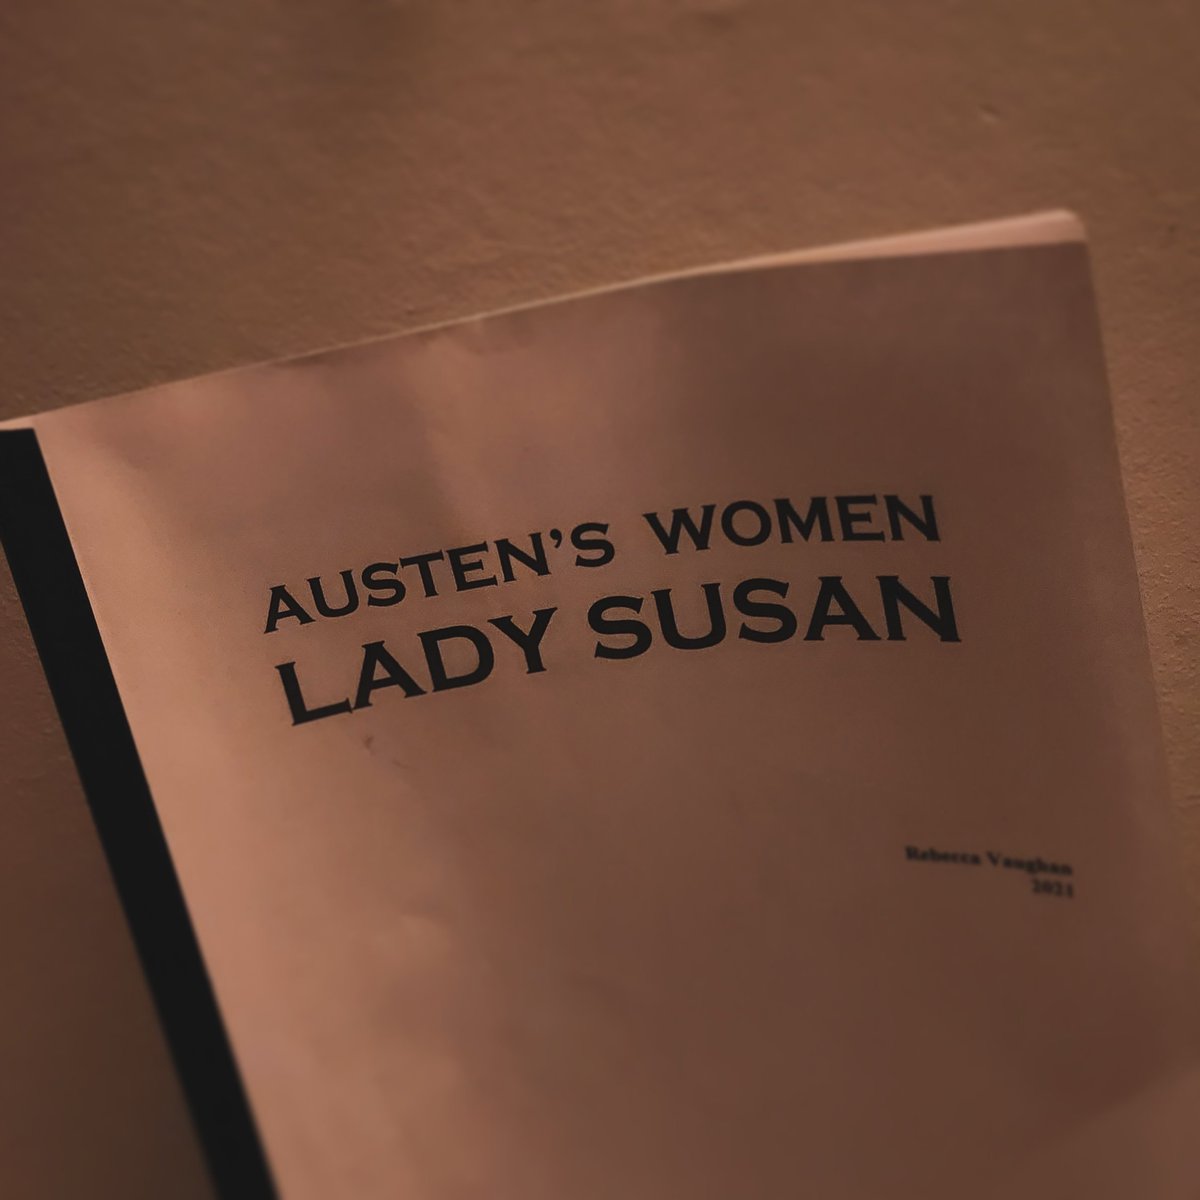 Today was the first day of rehearsals for our new show, Austen’s Women: LADY SUSAN! It's already been hugely exciting and fulfilling, working again with our great partners, @TheOldTownHall Tickets already on sale for the tour! #austen #ladysusan #literature #femalewriters